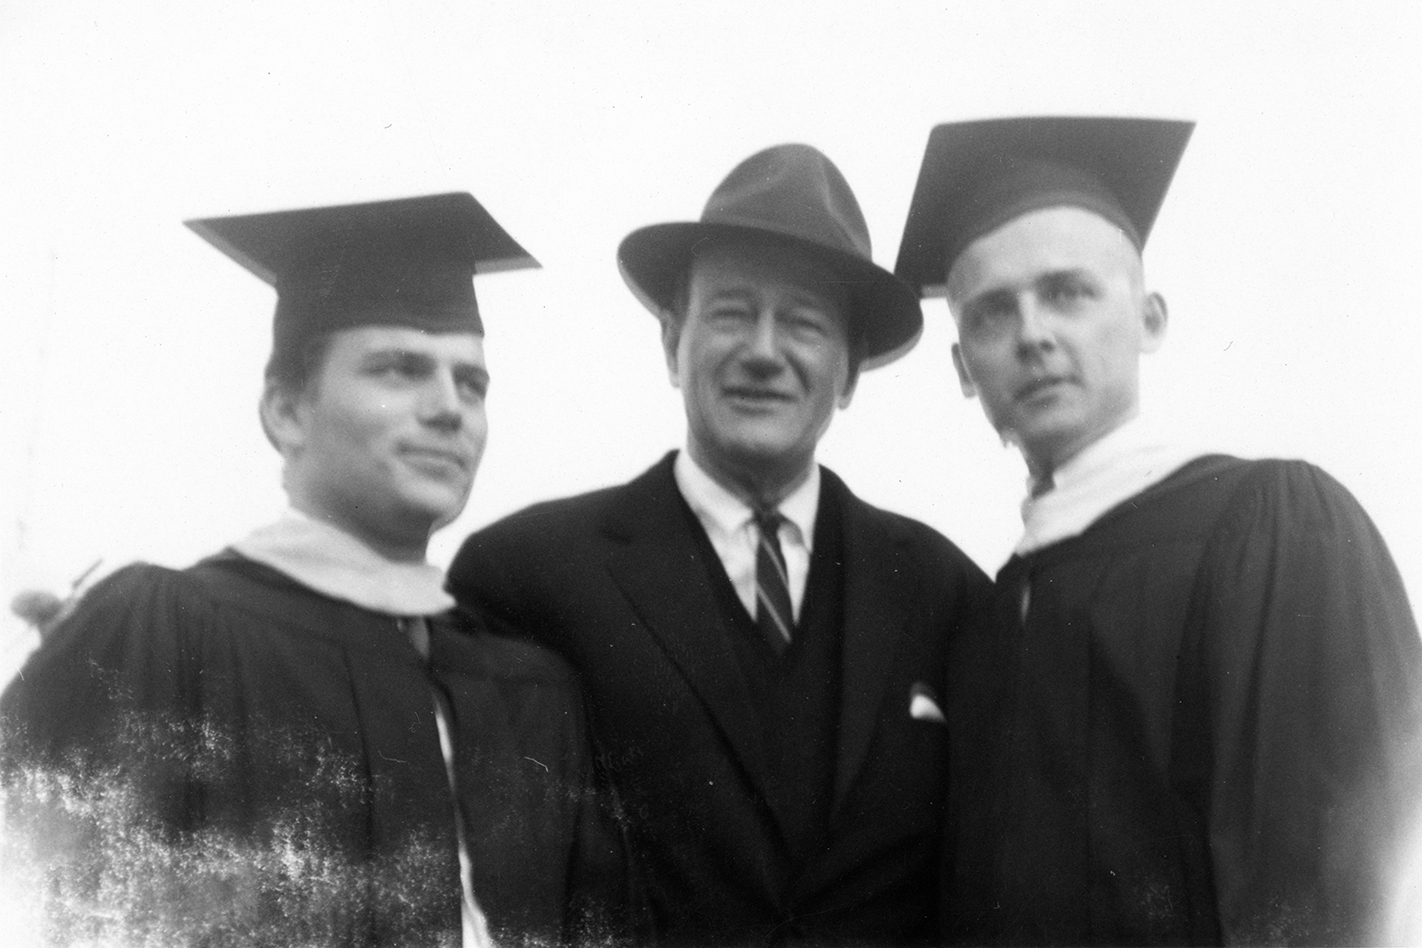 John Wayne (center) with son Patrick (left) at his graduation from LMU in 1961.